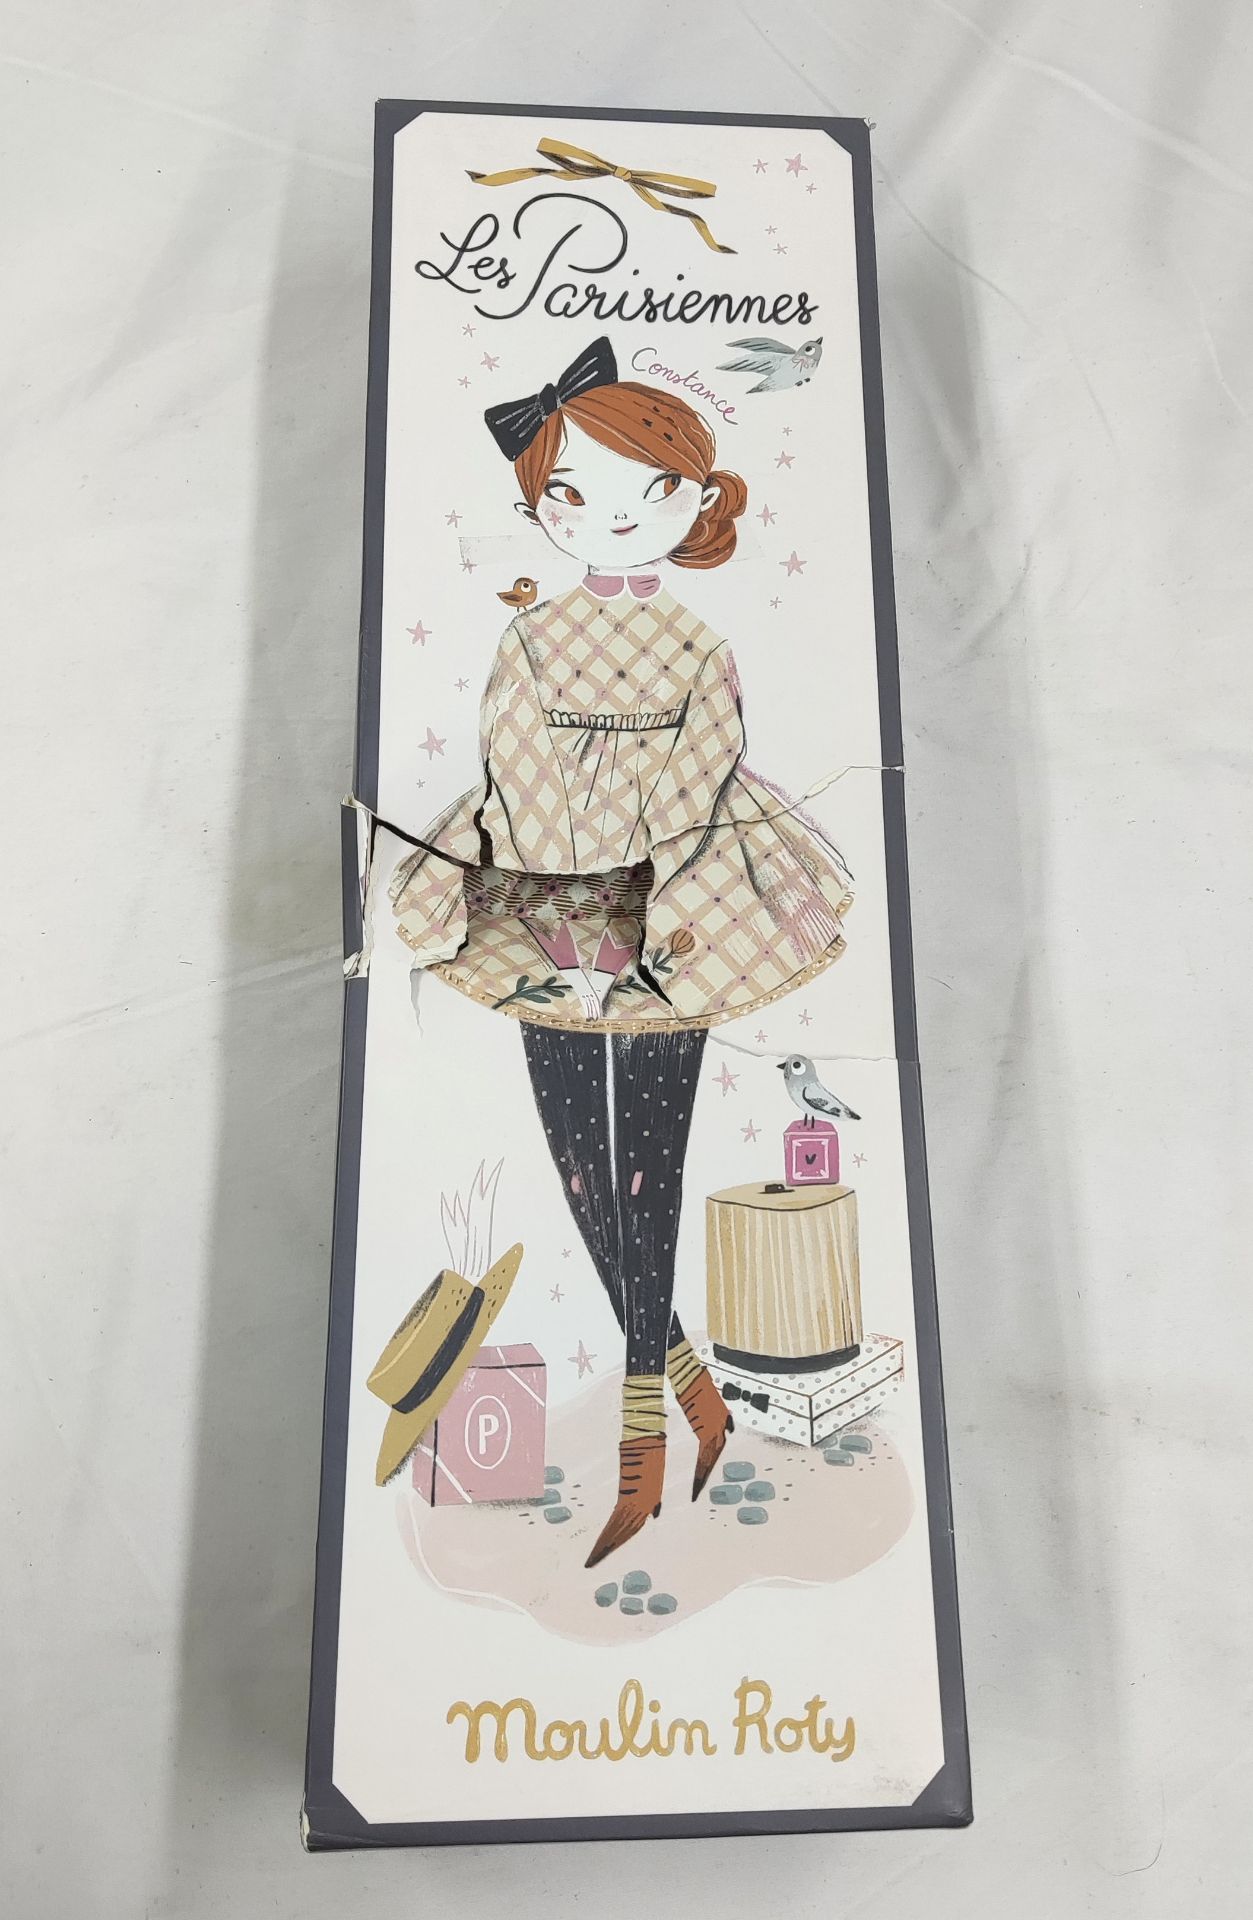 1 x MOULIN ROTY Madame Constance 47cm Les Parisiennes Doll - New/Boxed - Original RRP £60.00 - Image 9 of 10